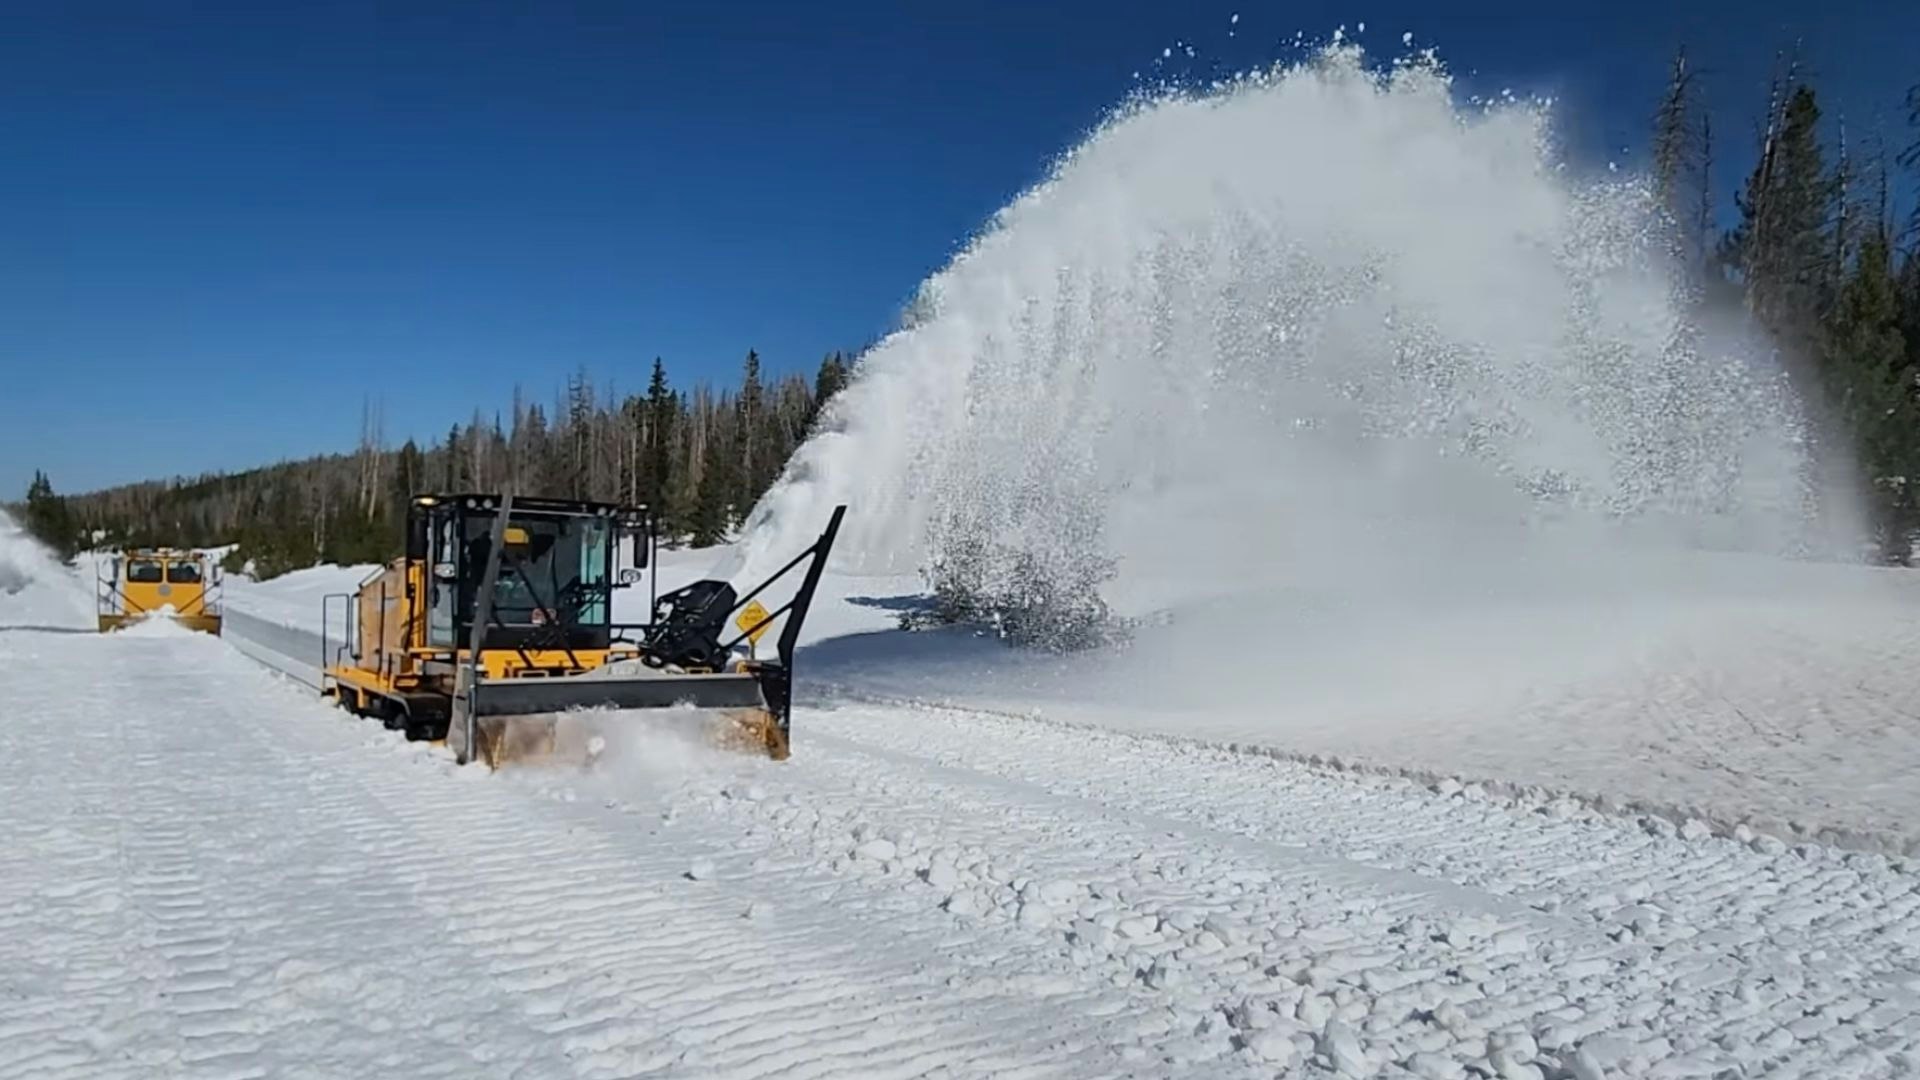 At $700,000, Wyoming Department of Transportation officials say their new Larue T80 snowblower is worth it. It can move up to 5,000 tons of snow an hour, 25% more than the departments older snowblowers.